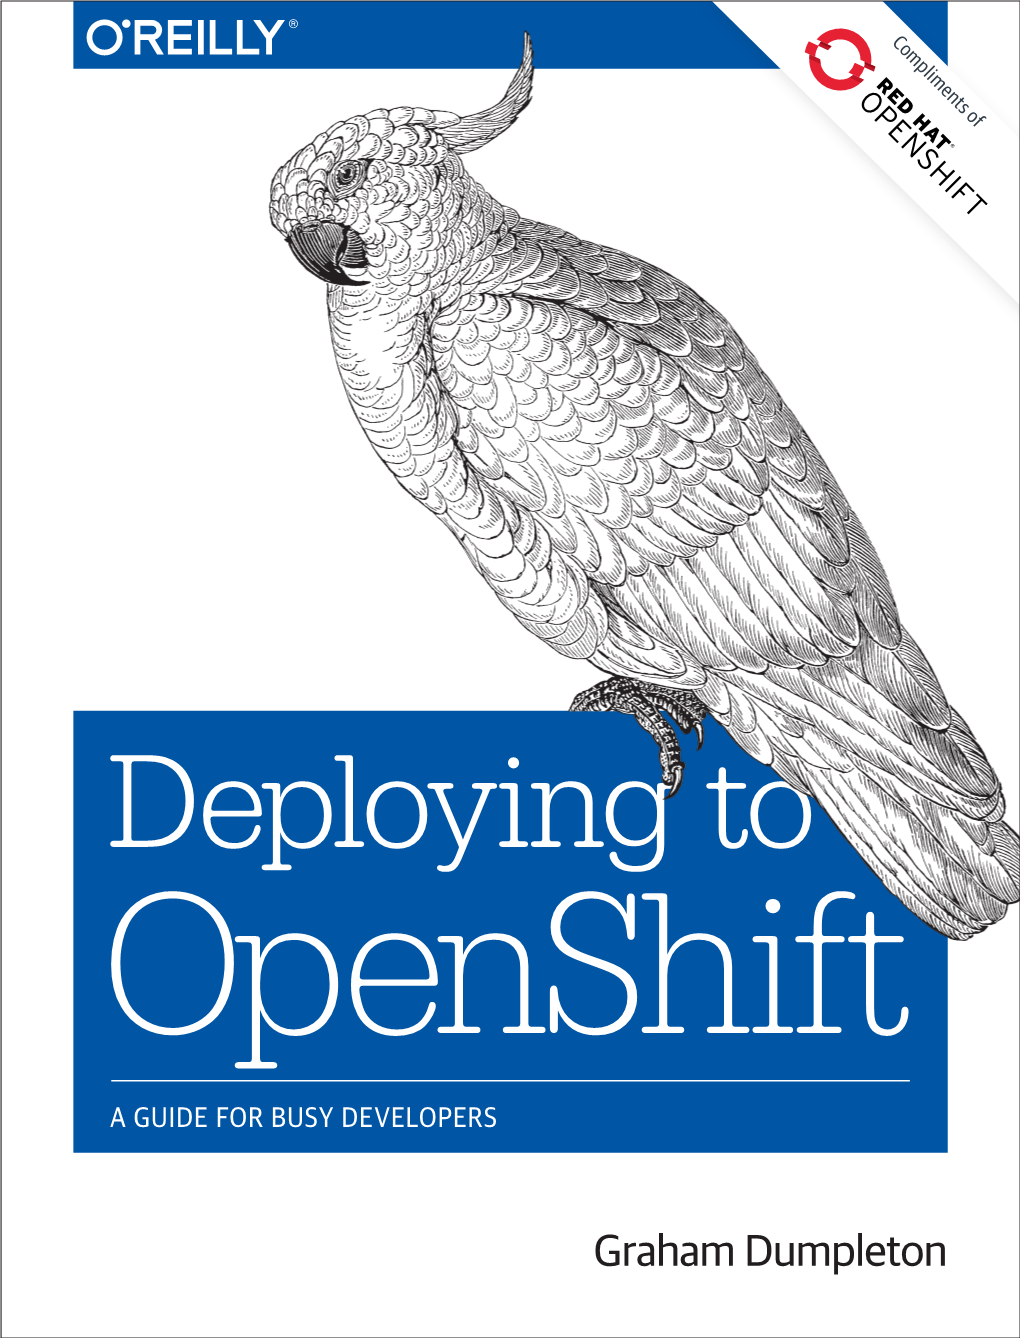 Deploying to Openshift a GUIDE for BUSY DEVELOPERS